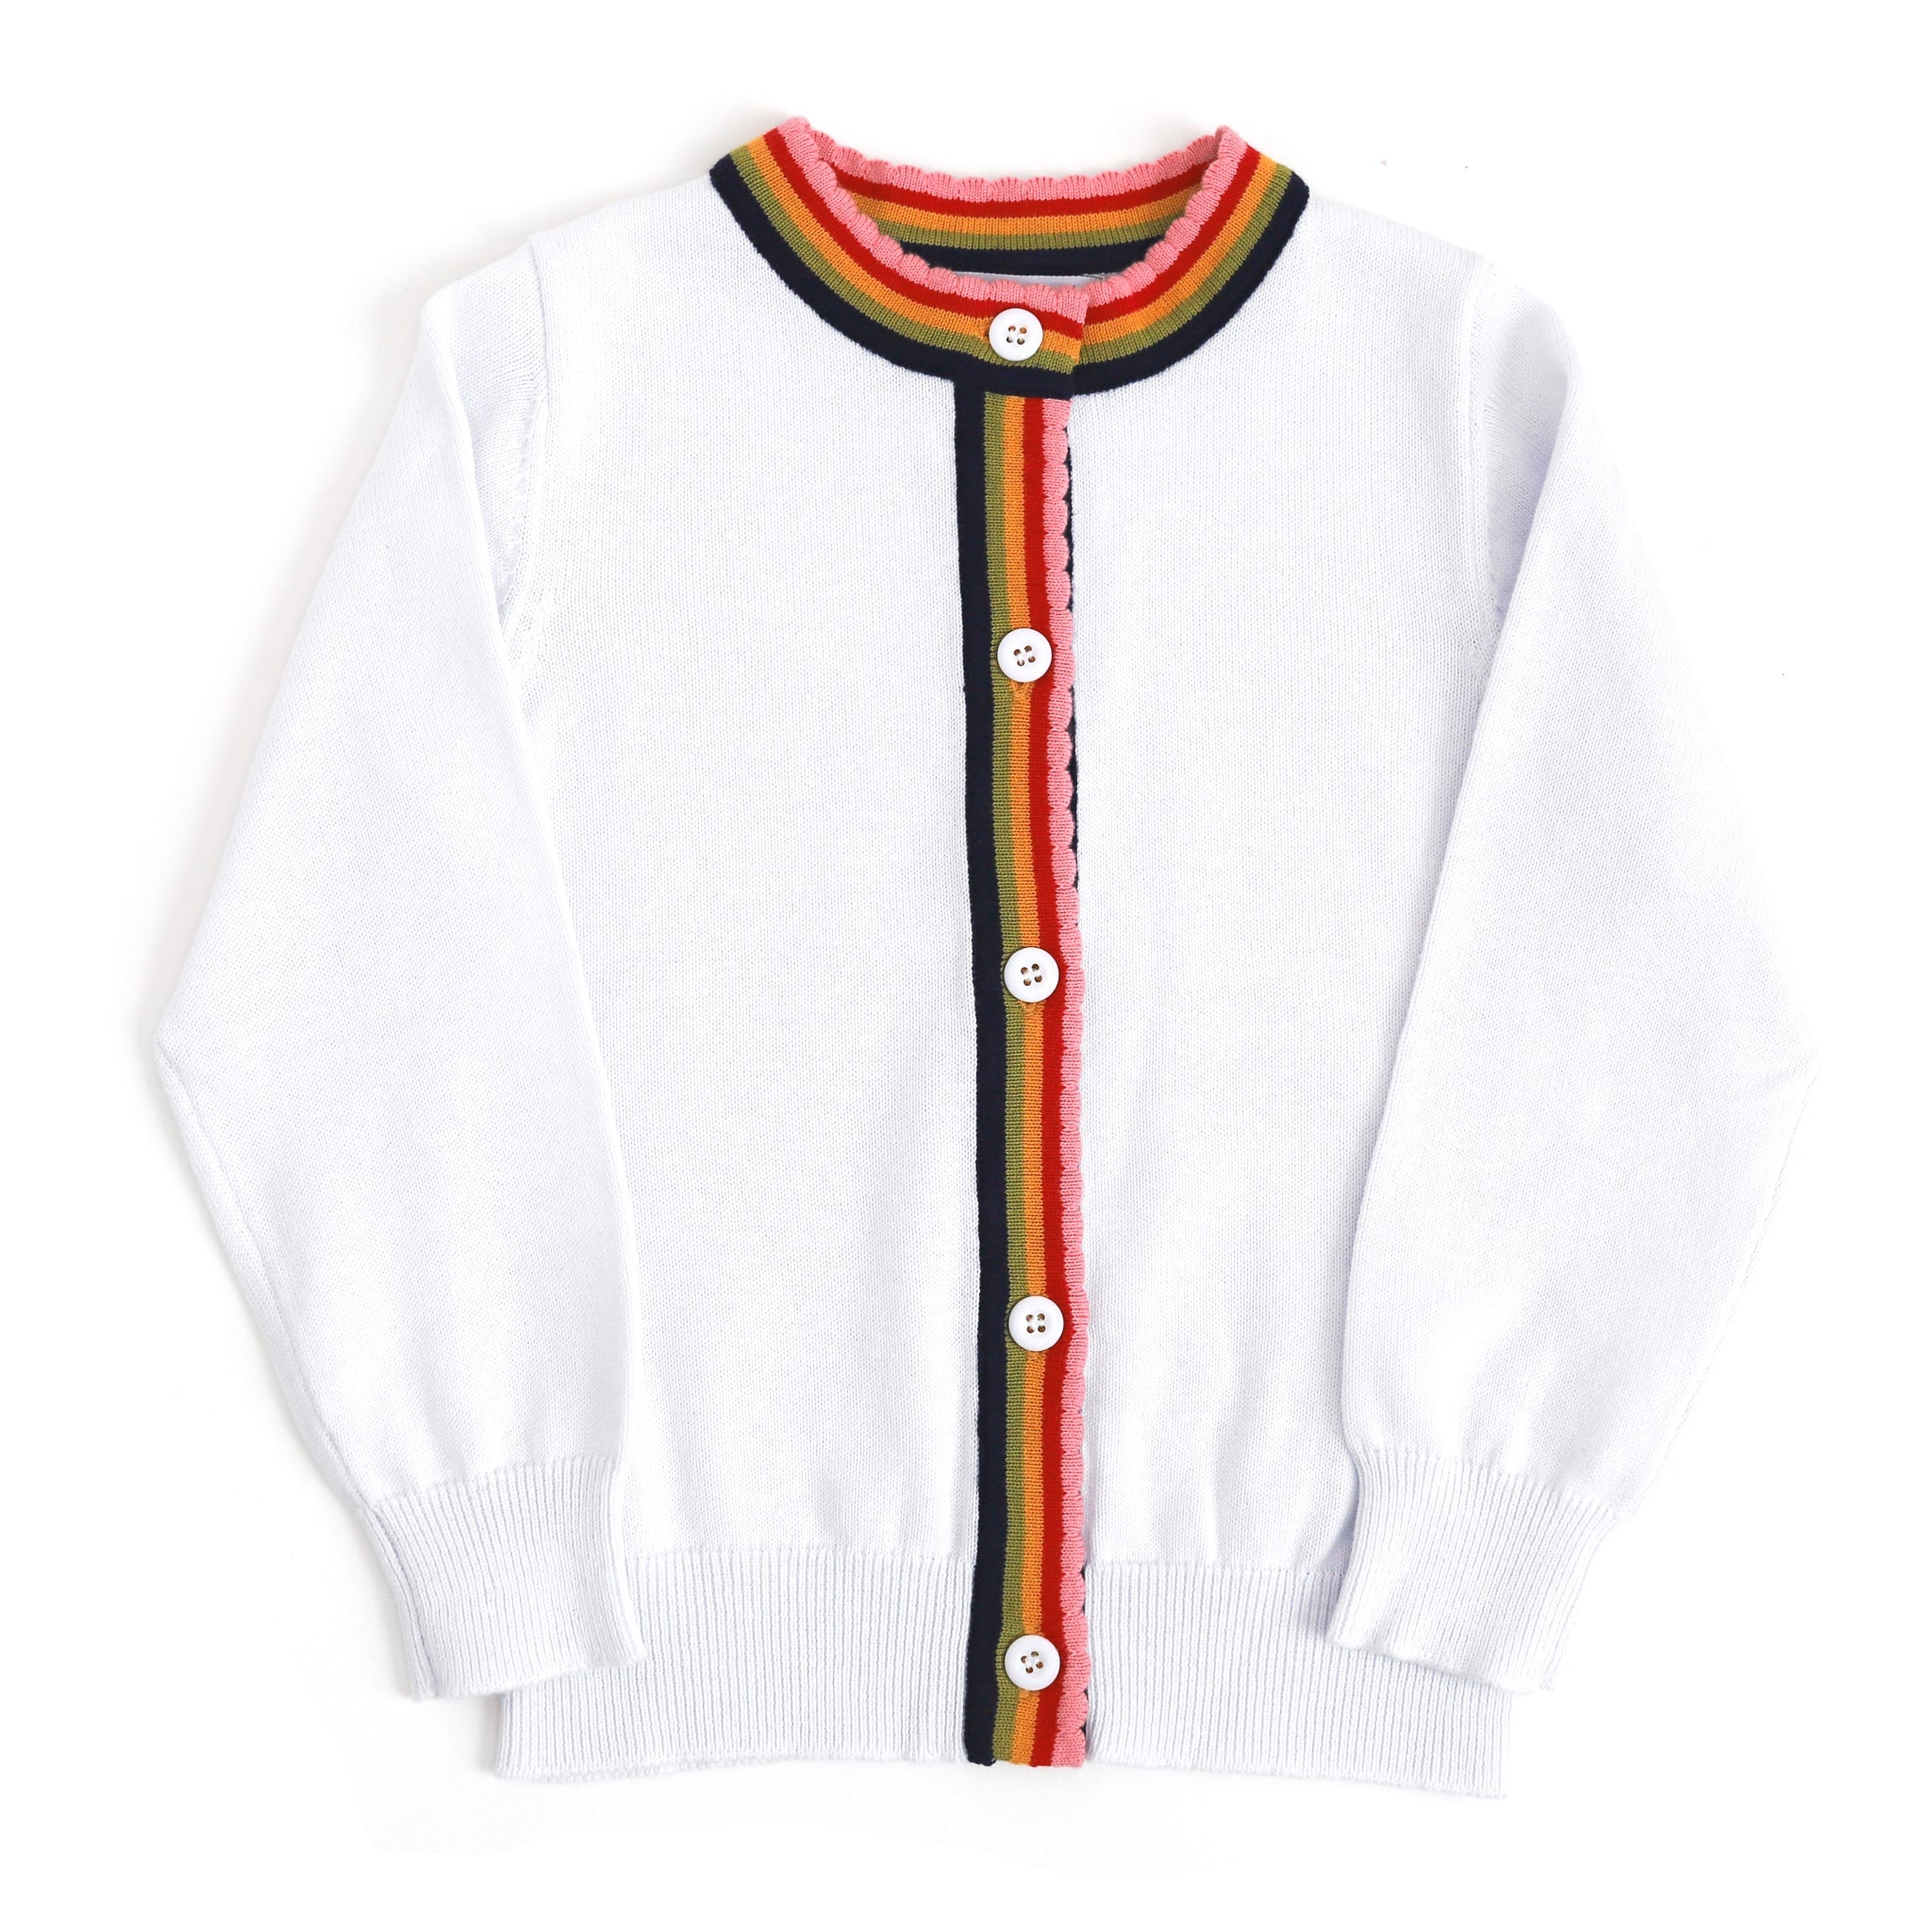 girls' back to school white and rainbow striped cardigan sweater